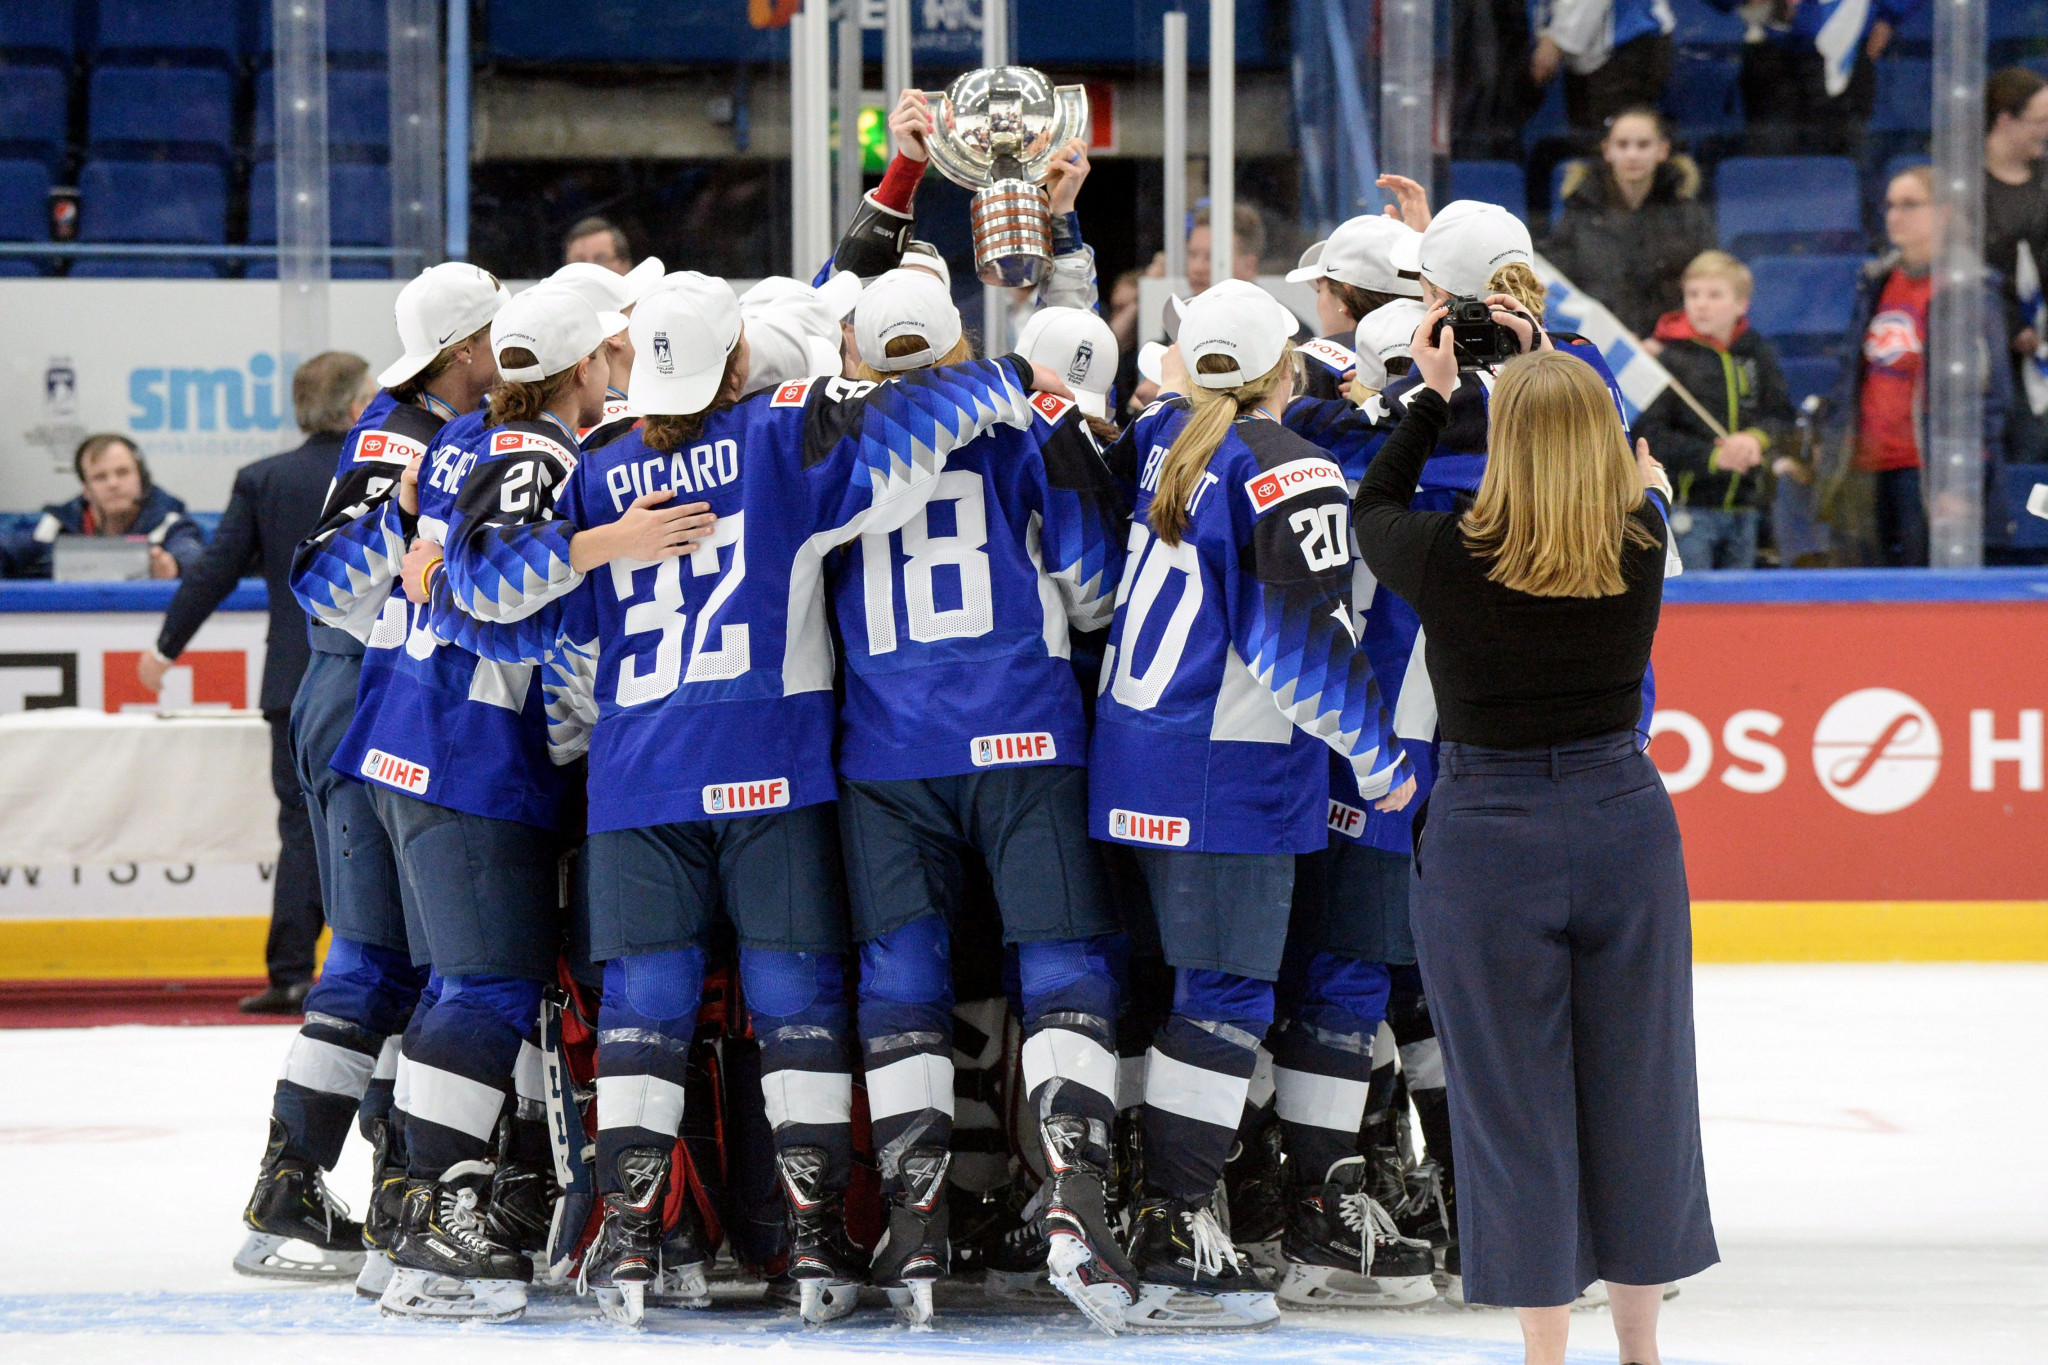 Game schedule released for Women’s World Ice Hockey Championship